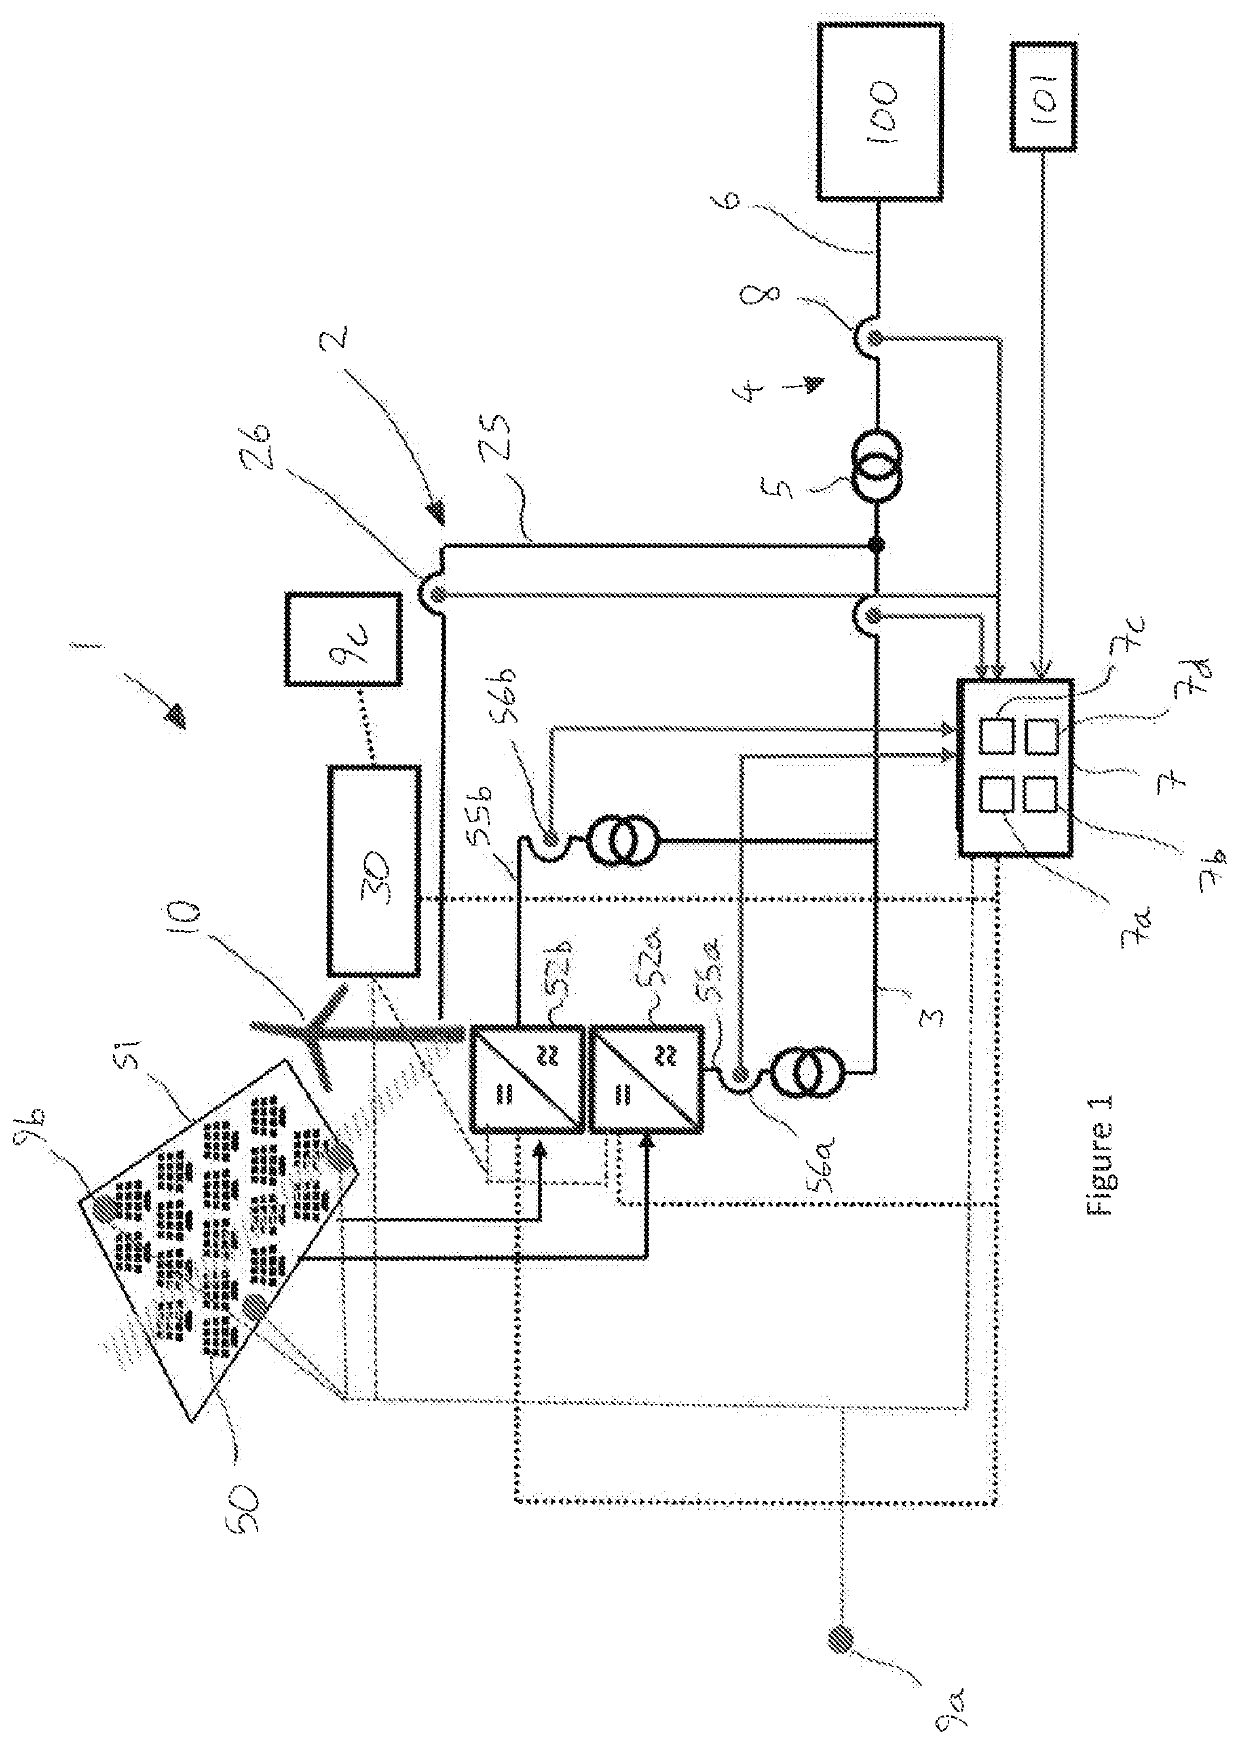 Method of operating a hybrid power plant to optimise pv power output